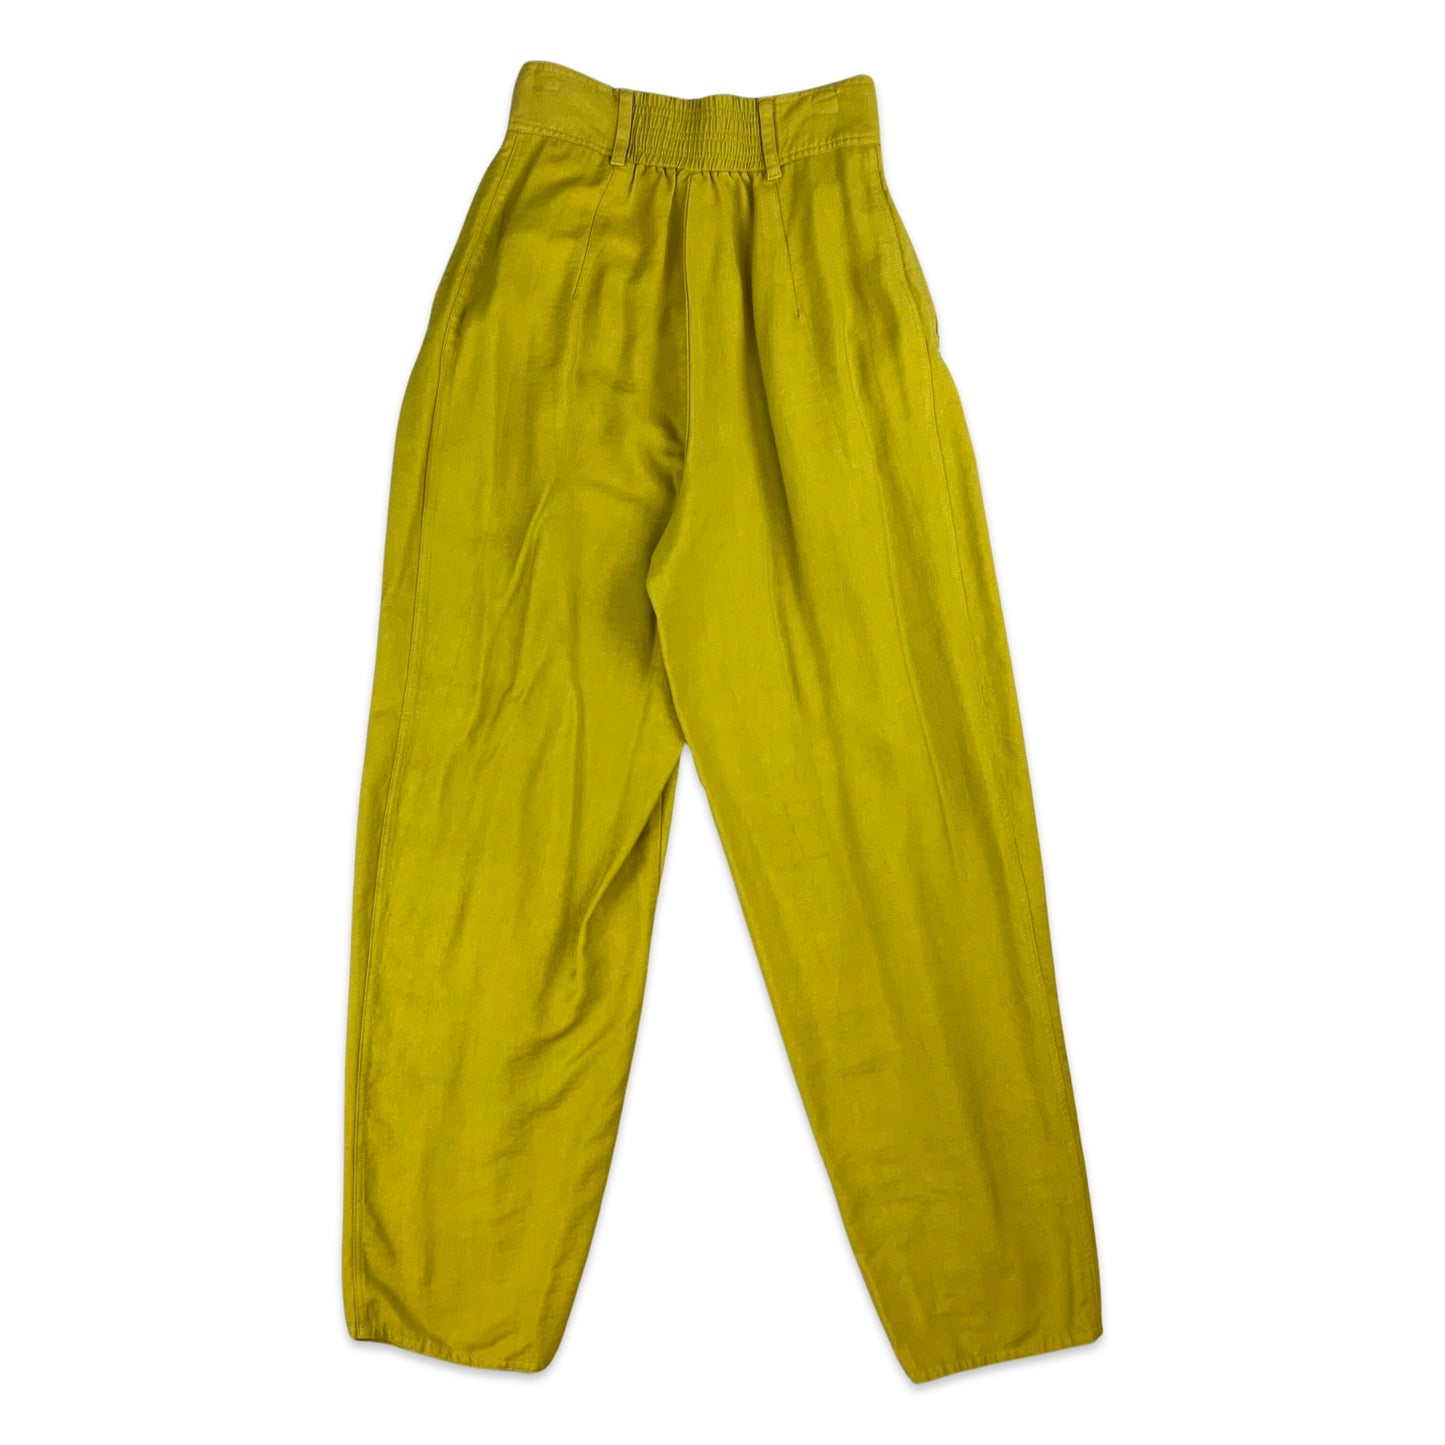 Vintage Lime Green Pegged Trousers